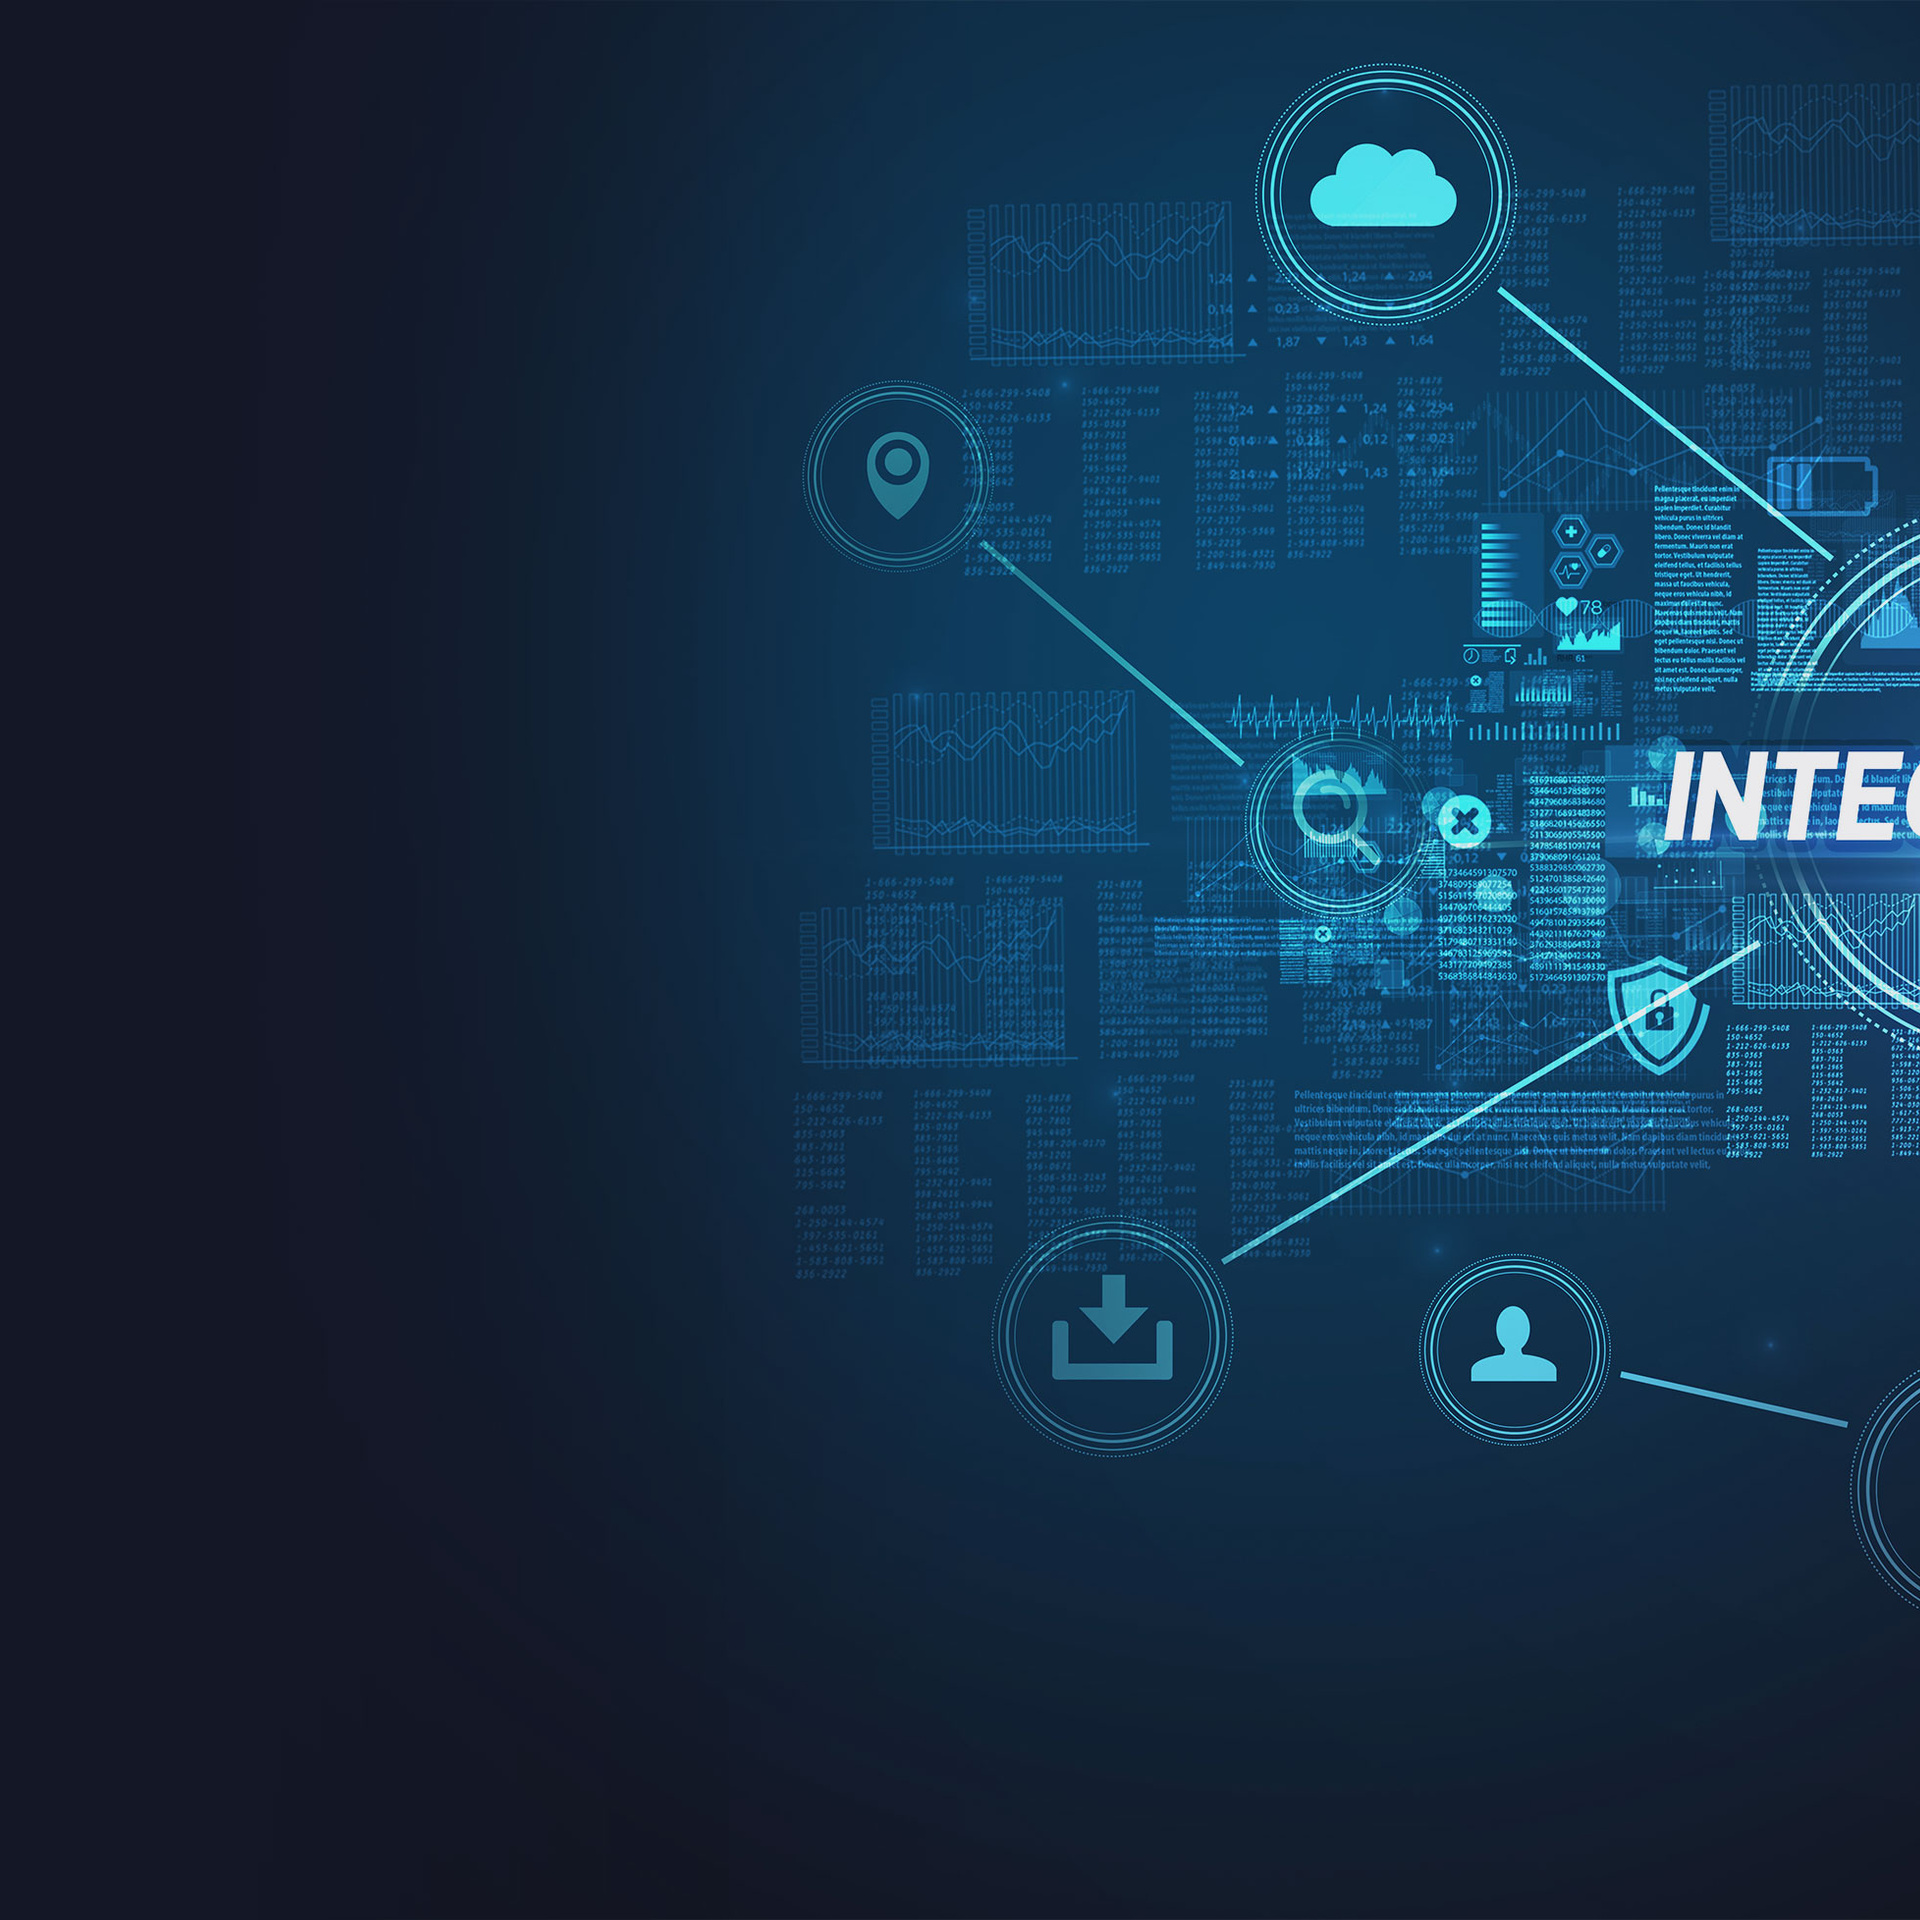 Data Integration Service and Consulting Header Image